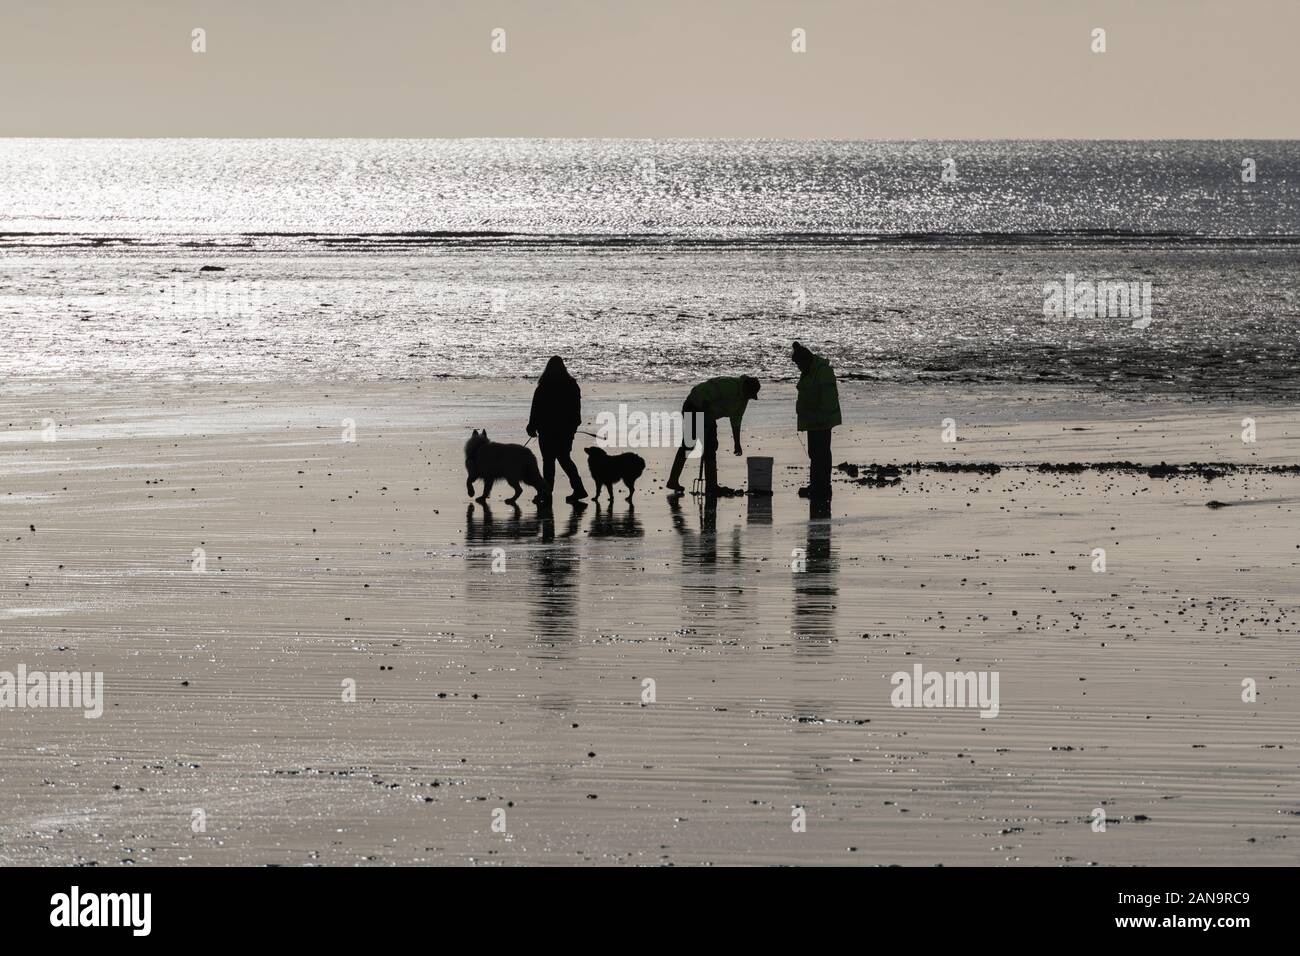 Silhouette of dog walkers owners walking their two dogs on Par beach, Cornwall, UK + man digging for fishing bait in sand [? Lugworms]. Outgoing tide. Stock Photo